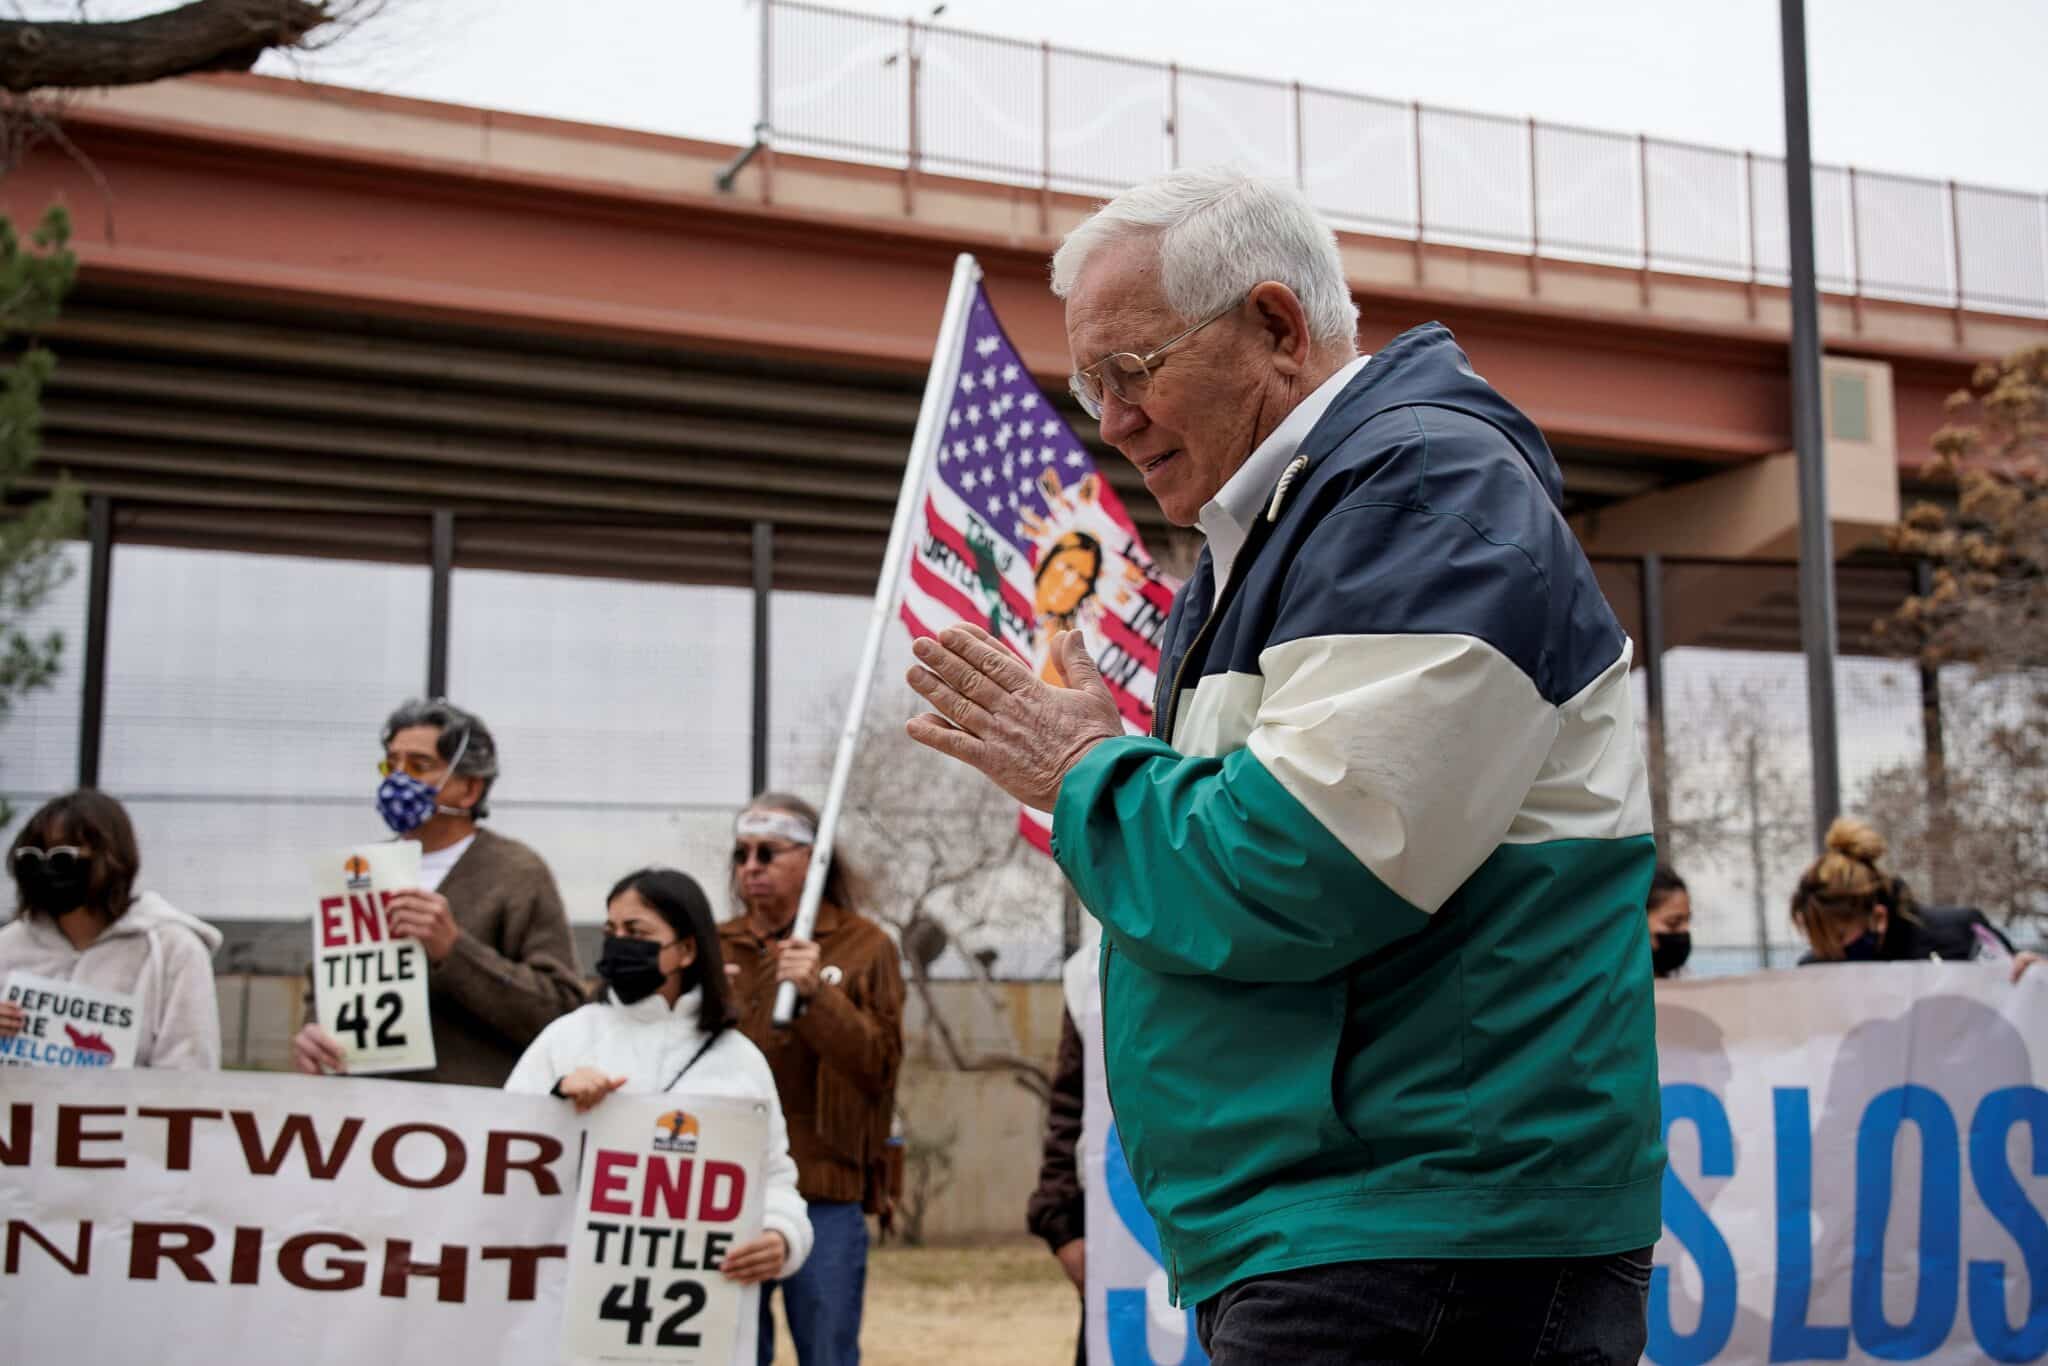 Ruben Garcia, director of Annunciation House, attends a march in downtown El Paso, Texas, Jan. 7, 2023, to demand an end to the immigration policy called "Title 42" and to support the rights of migrants coming to the border. A state judge ruled July 2, 2024, that Texas Attorney General Ken Paxton's effort to shut down Annunciation House, a Catholic nonprofit serving migrants, violated the Texas Religious Freedom Restoration Act. (OSV News photo/Paul Ratje, Reuters)